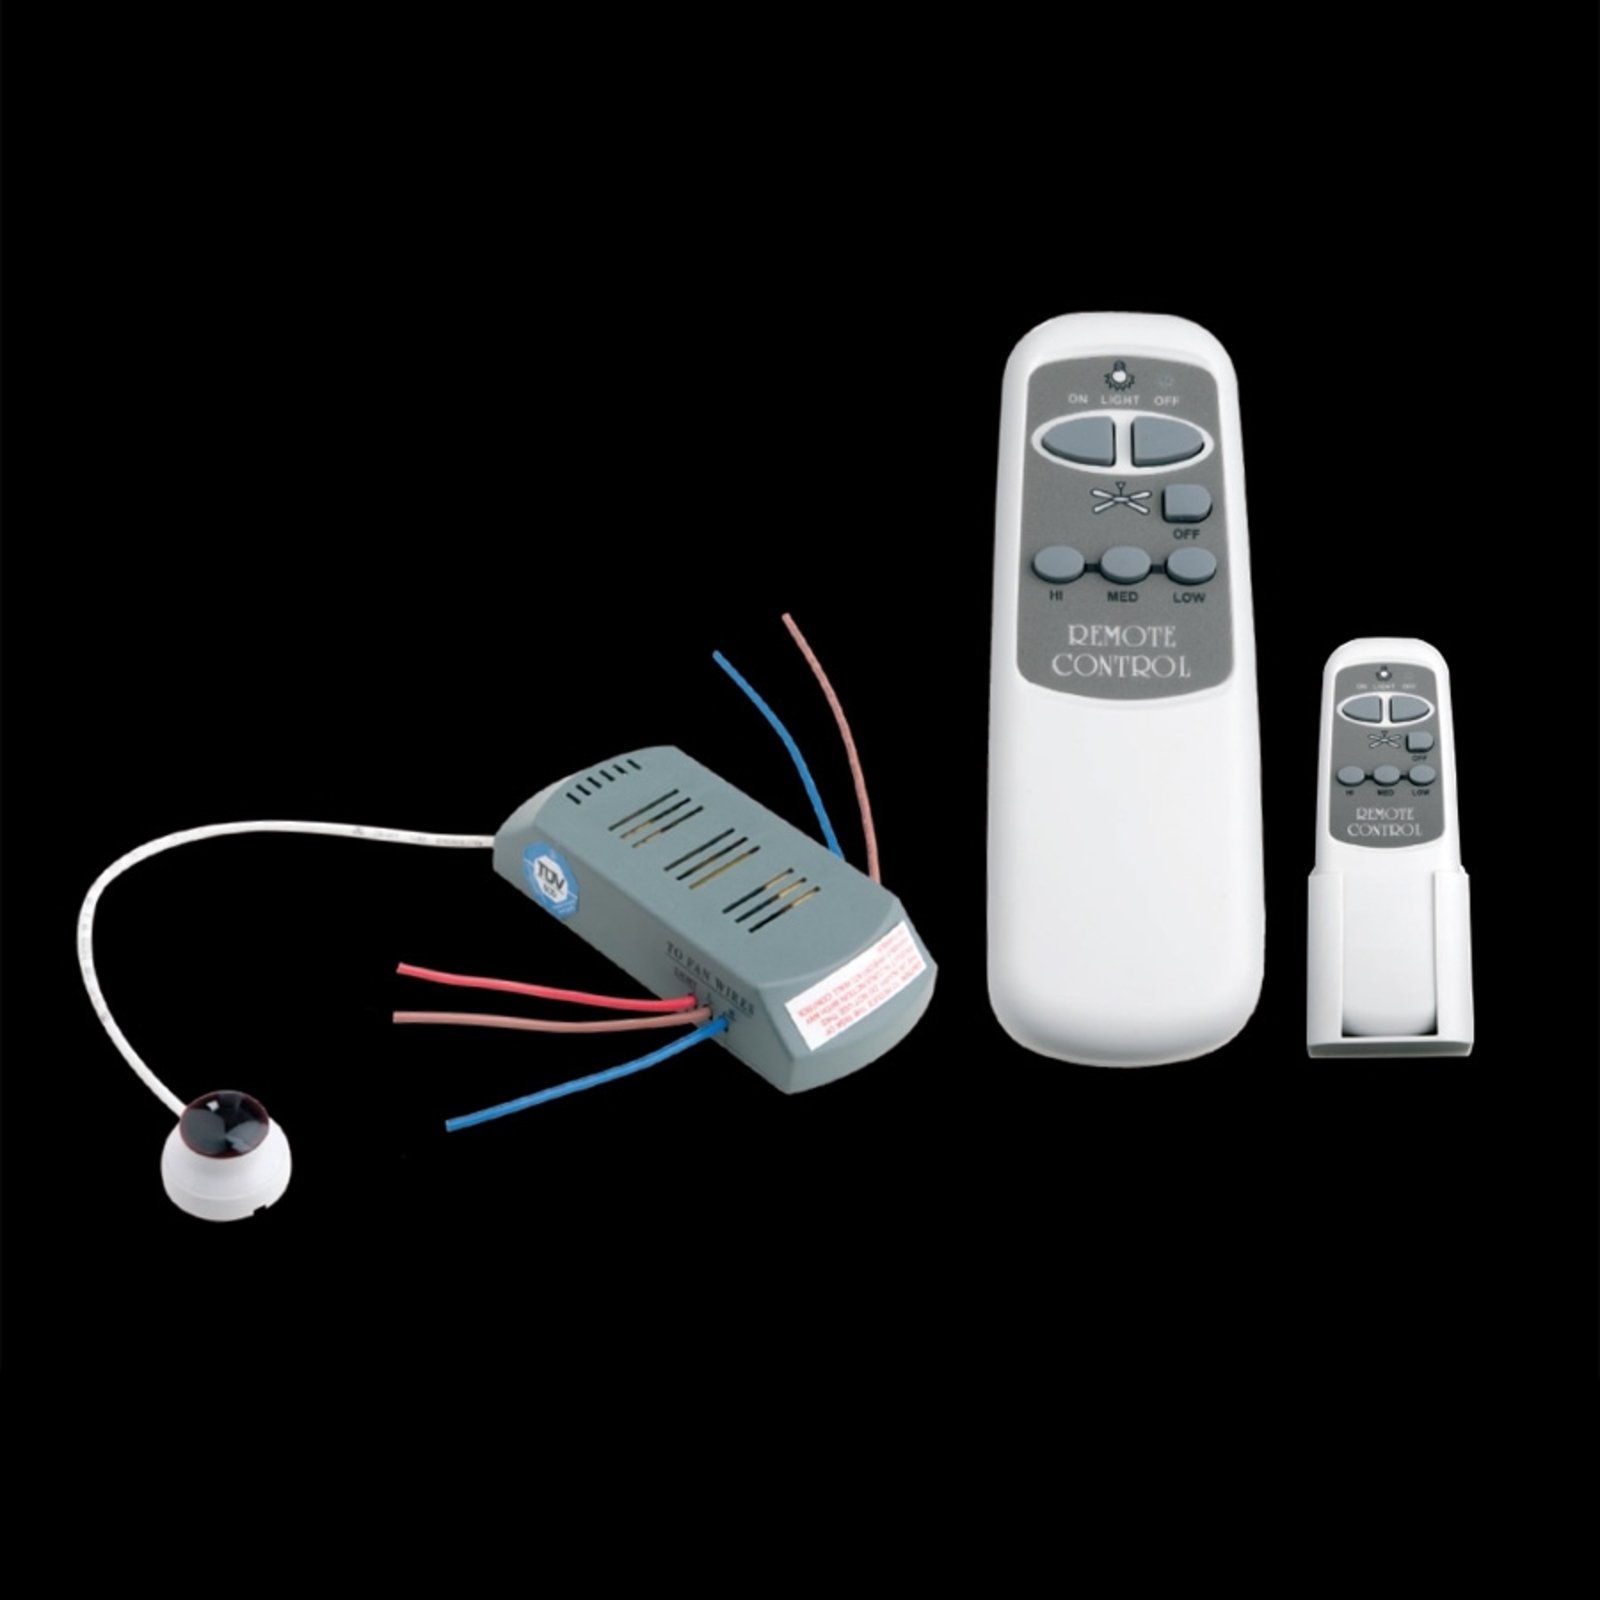 Remote control for Globo ceiling fans